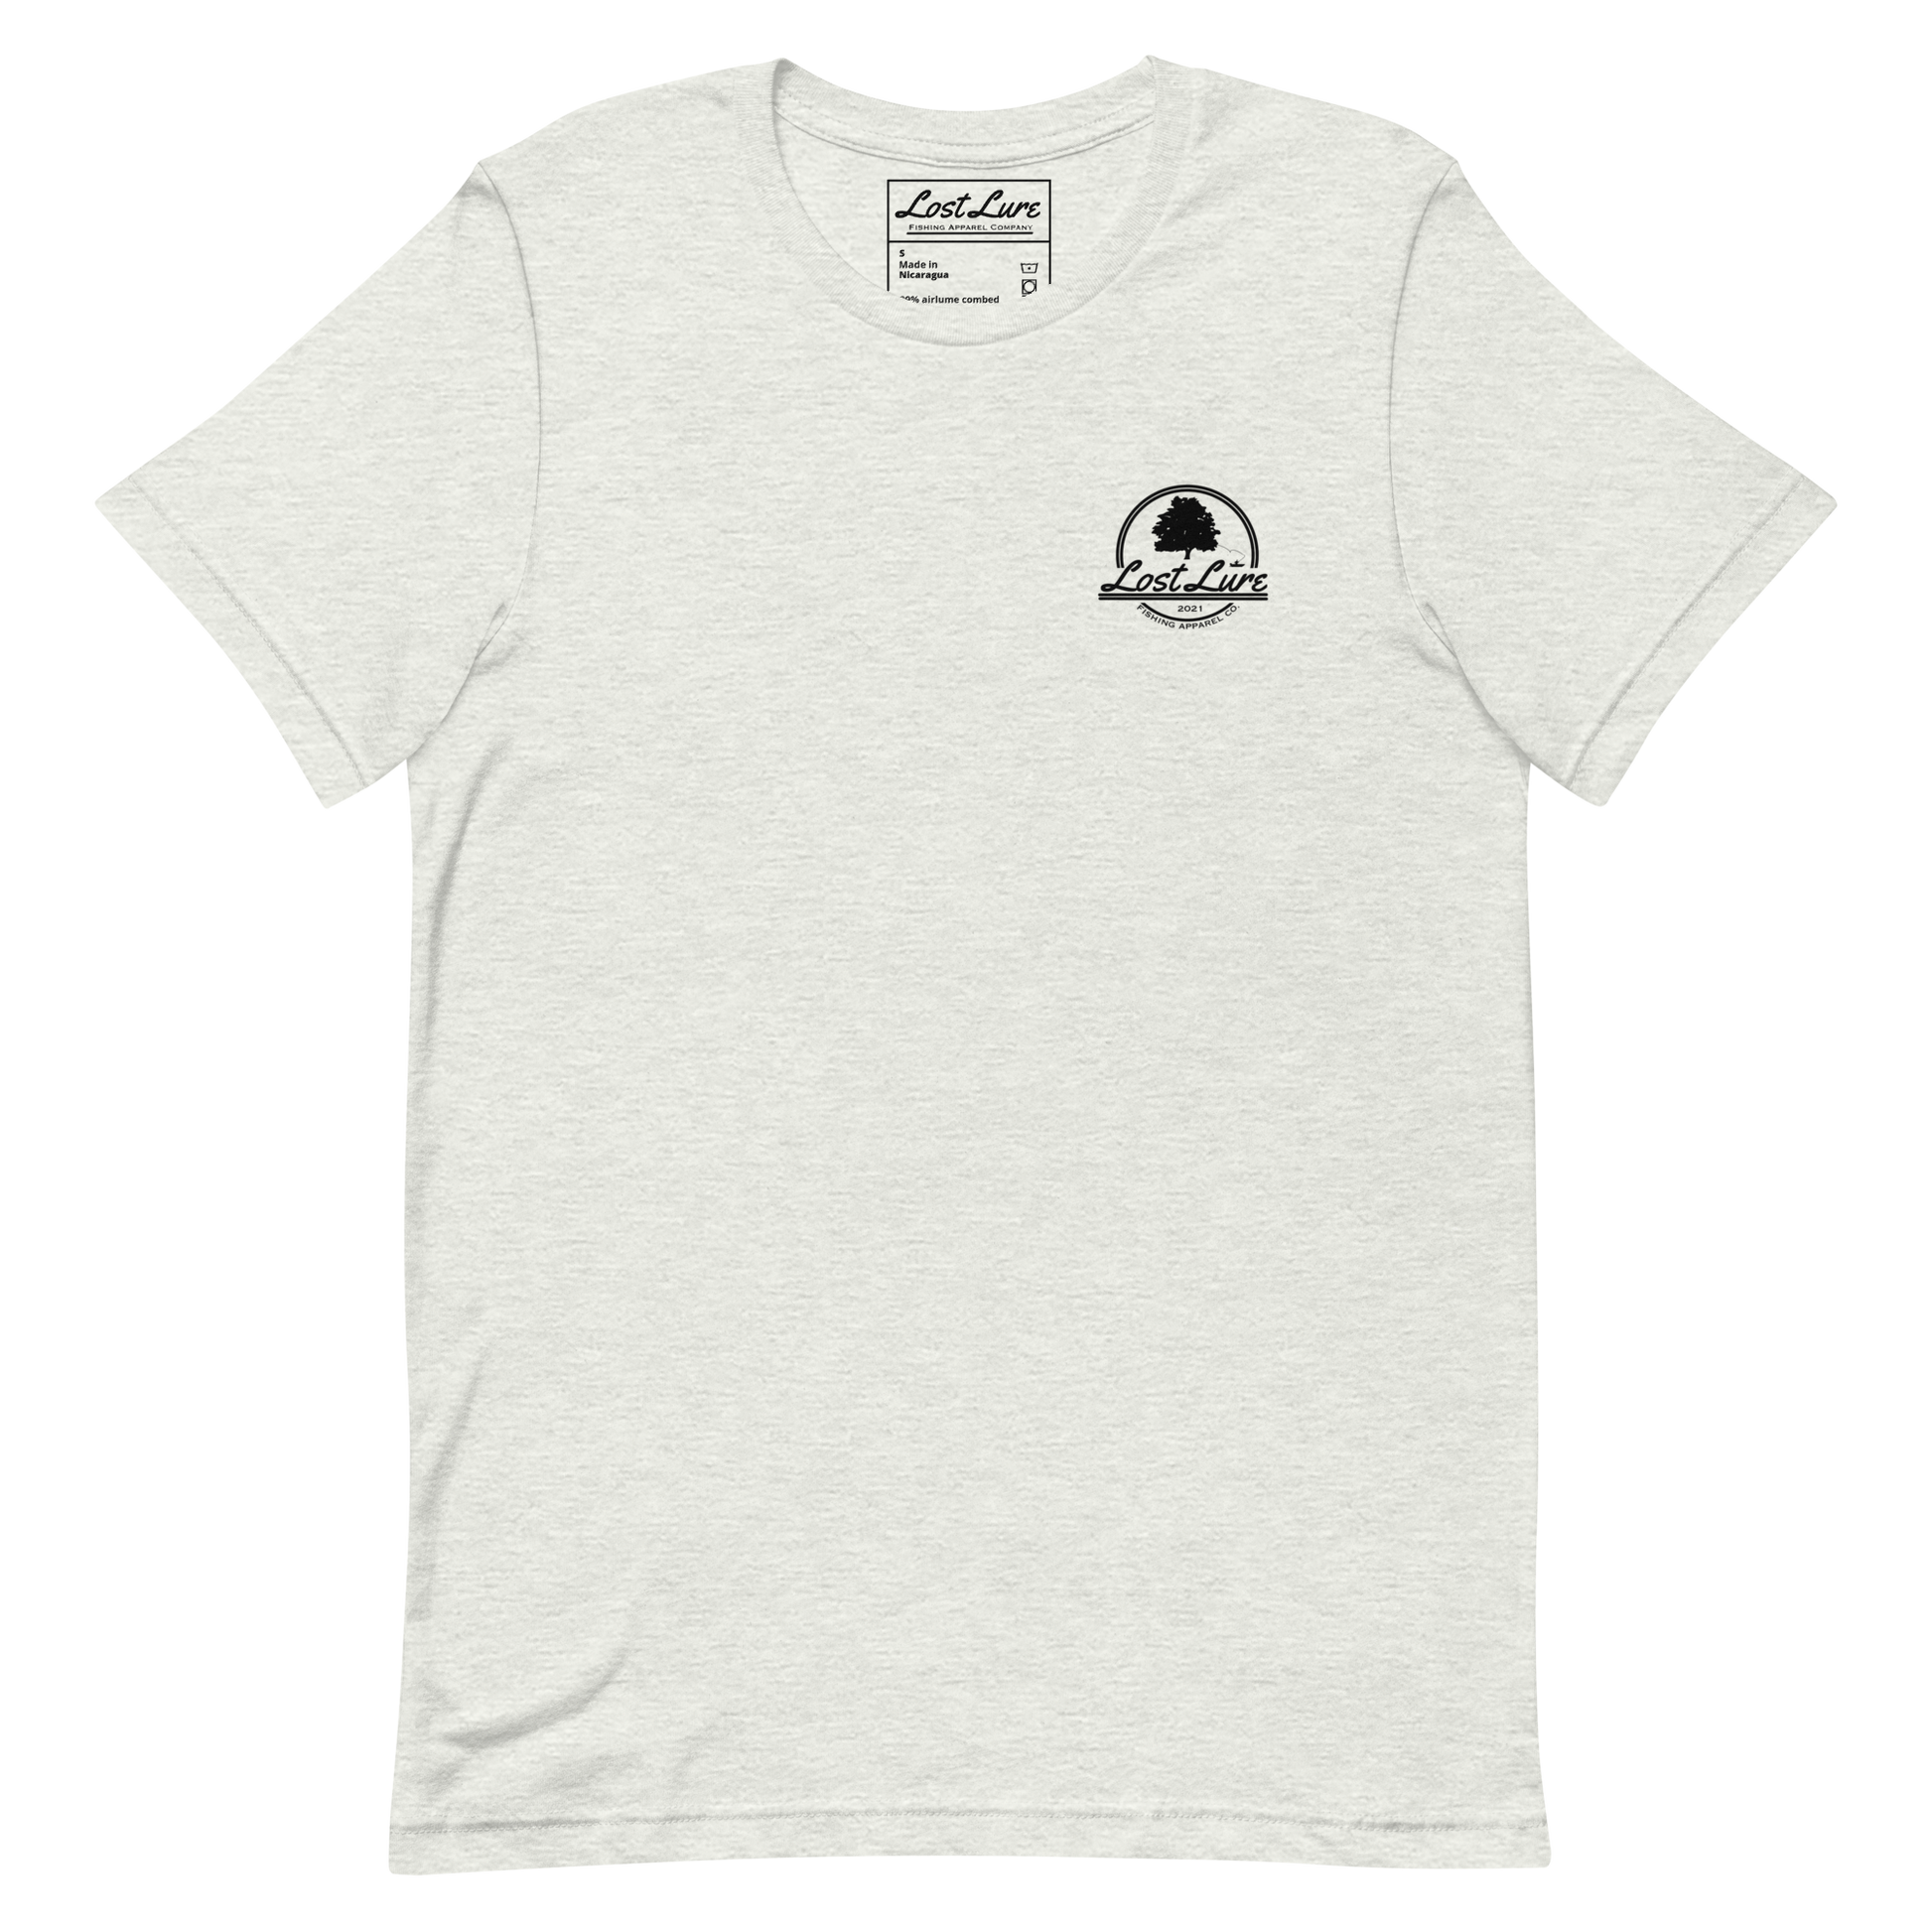 Cutthroat Trout fishing shirt. It’s an American traditional style design with a cutthroat trout and a dagger. The shirt reads Cutthroat trout, est. 2021, lost lure fishing apparel company. The front of the shirt has the lost lure logo. Ash colored  fishing shirt, front side